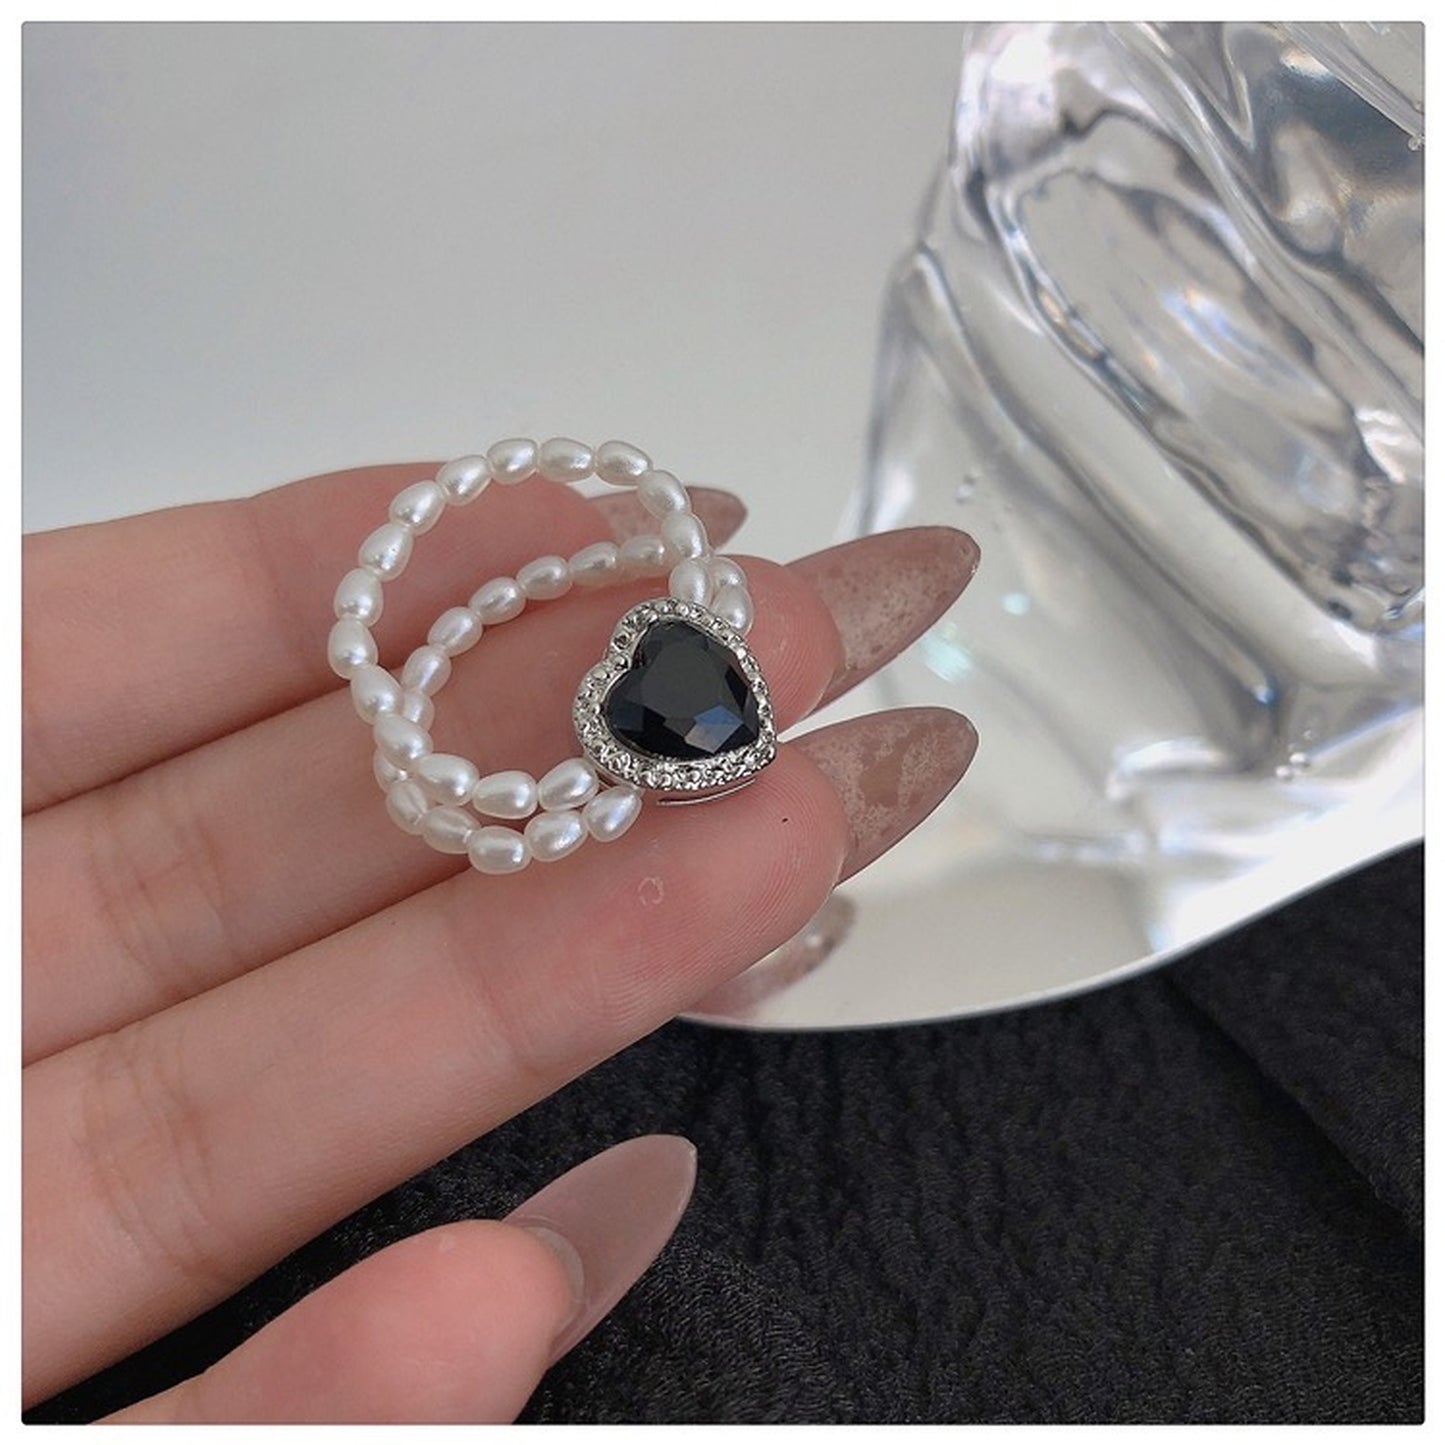 Handmade pearl ring, Double layer heart rings, Pearl beaded ring, Unique statement ring, Black spade ring, Y2K heart ring, Black heart ring